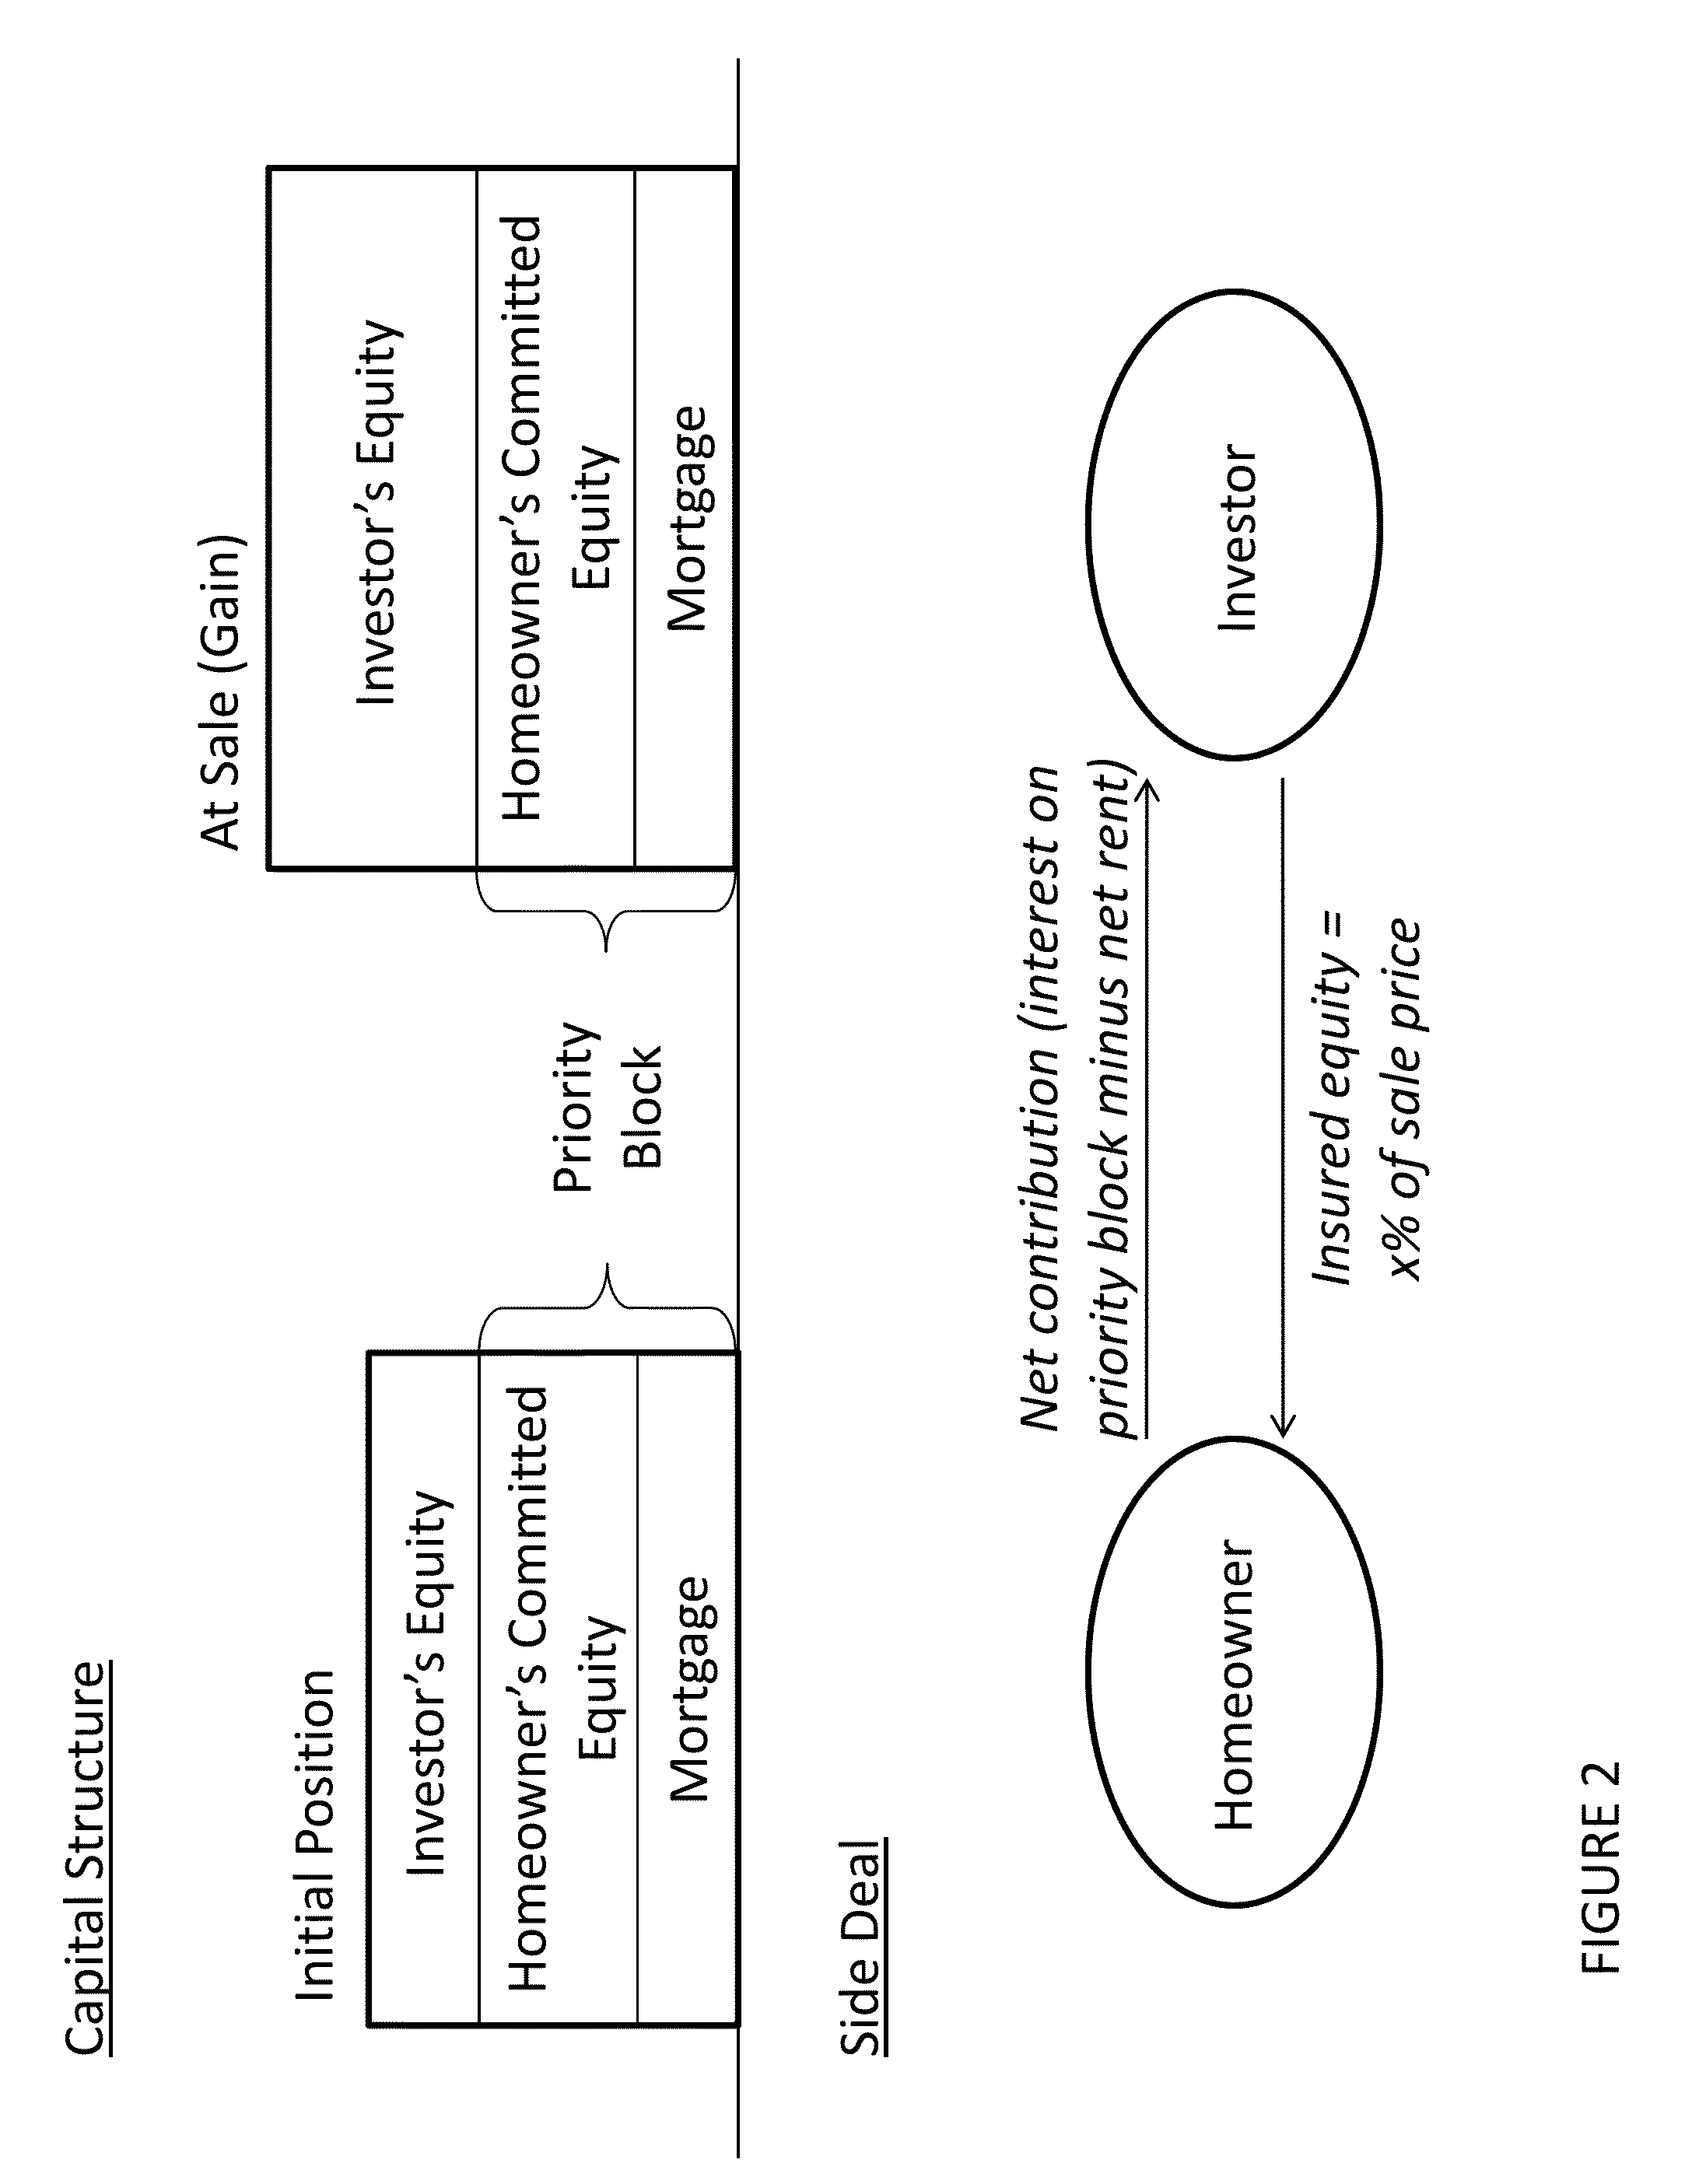 System and method for building equity service models